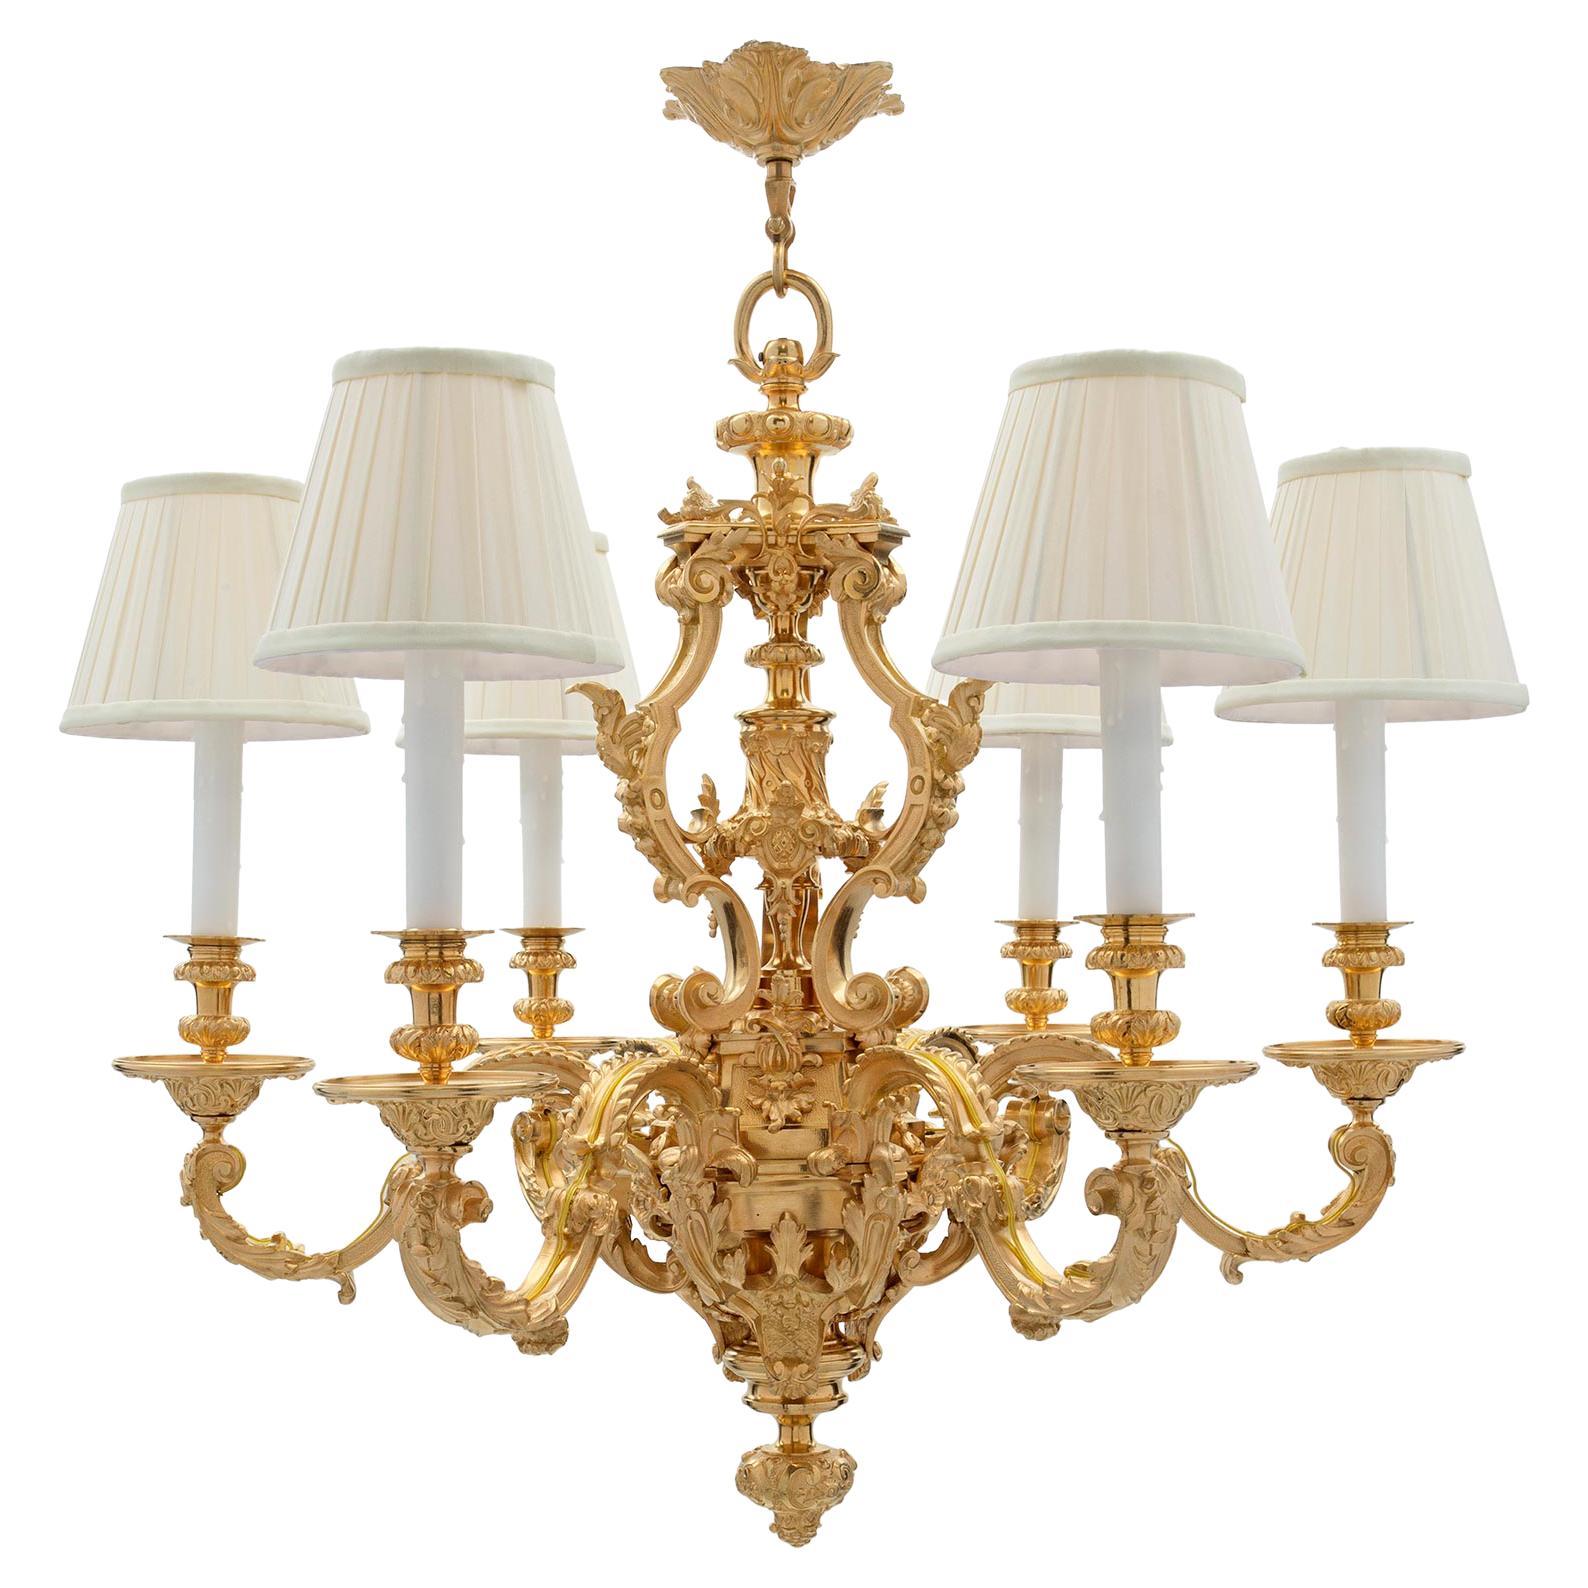  French 19th Century Renaissance Style Ormolu Six-Light Chandelier For Sale